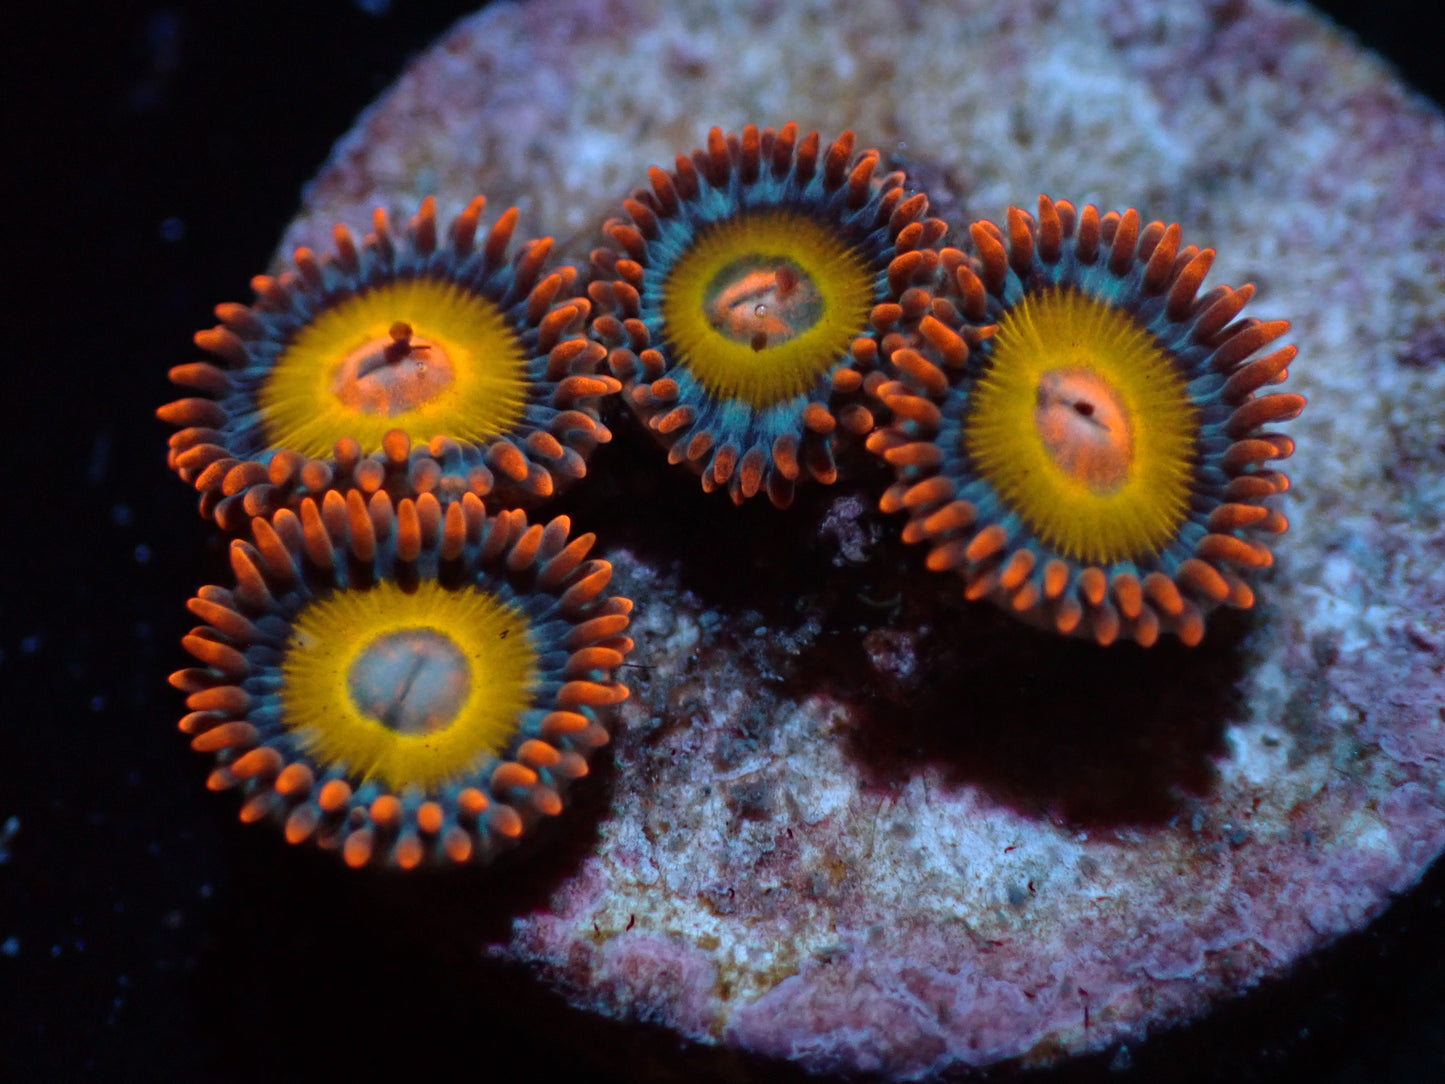 Blondies Zoas Auctions 3/27 ended